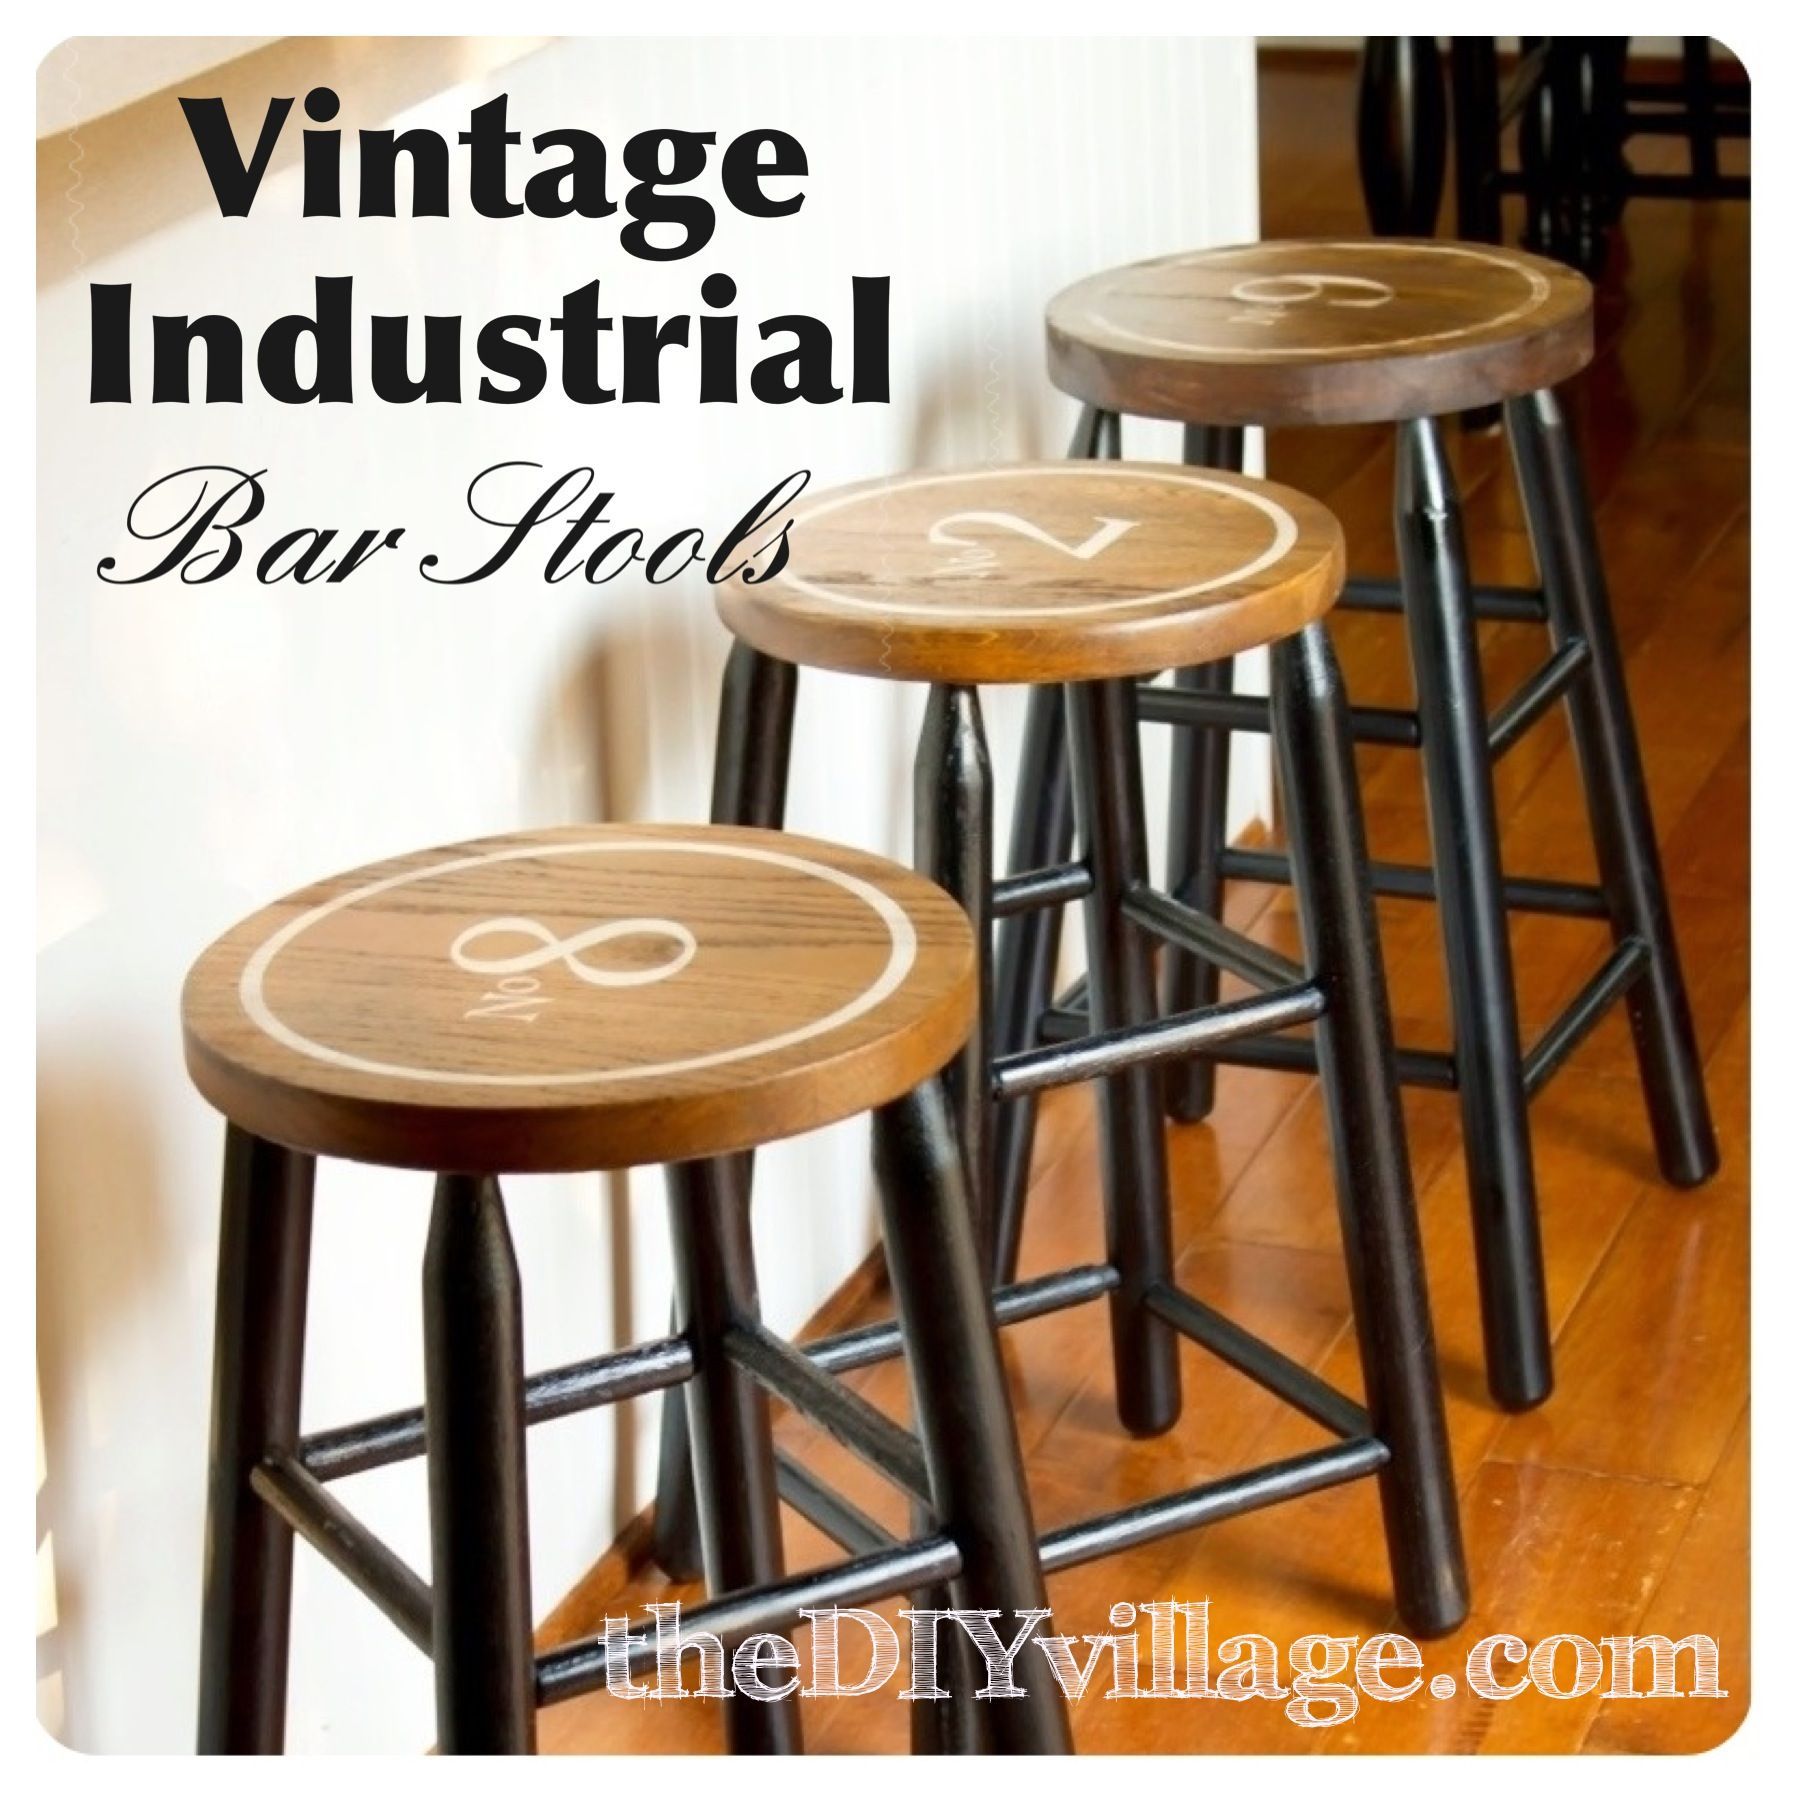 One day when I have a kitchen big enough…I am in love with these vintage bar s